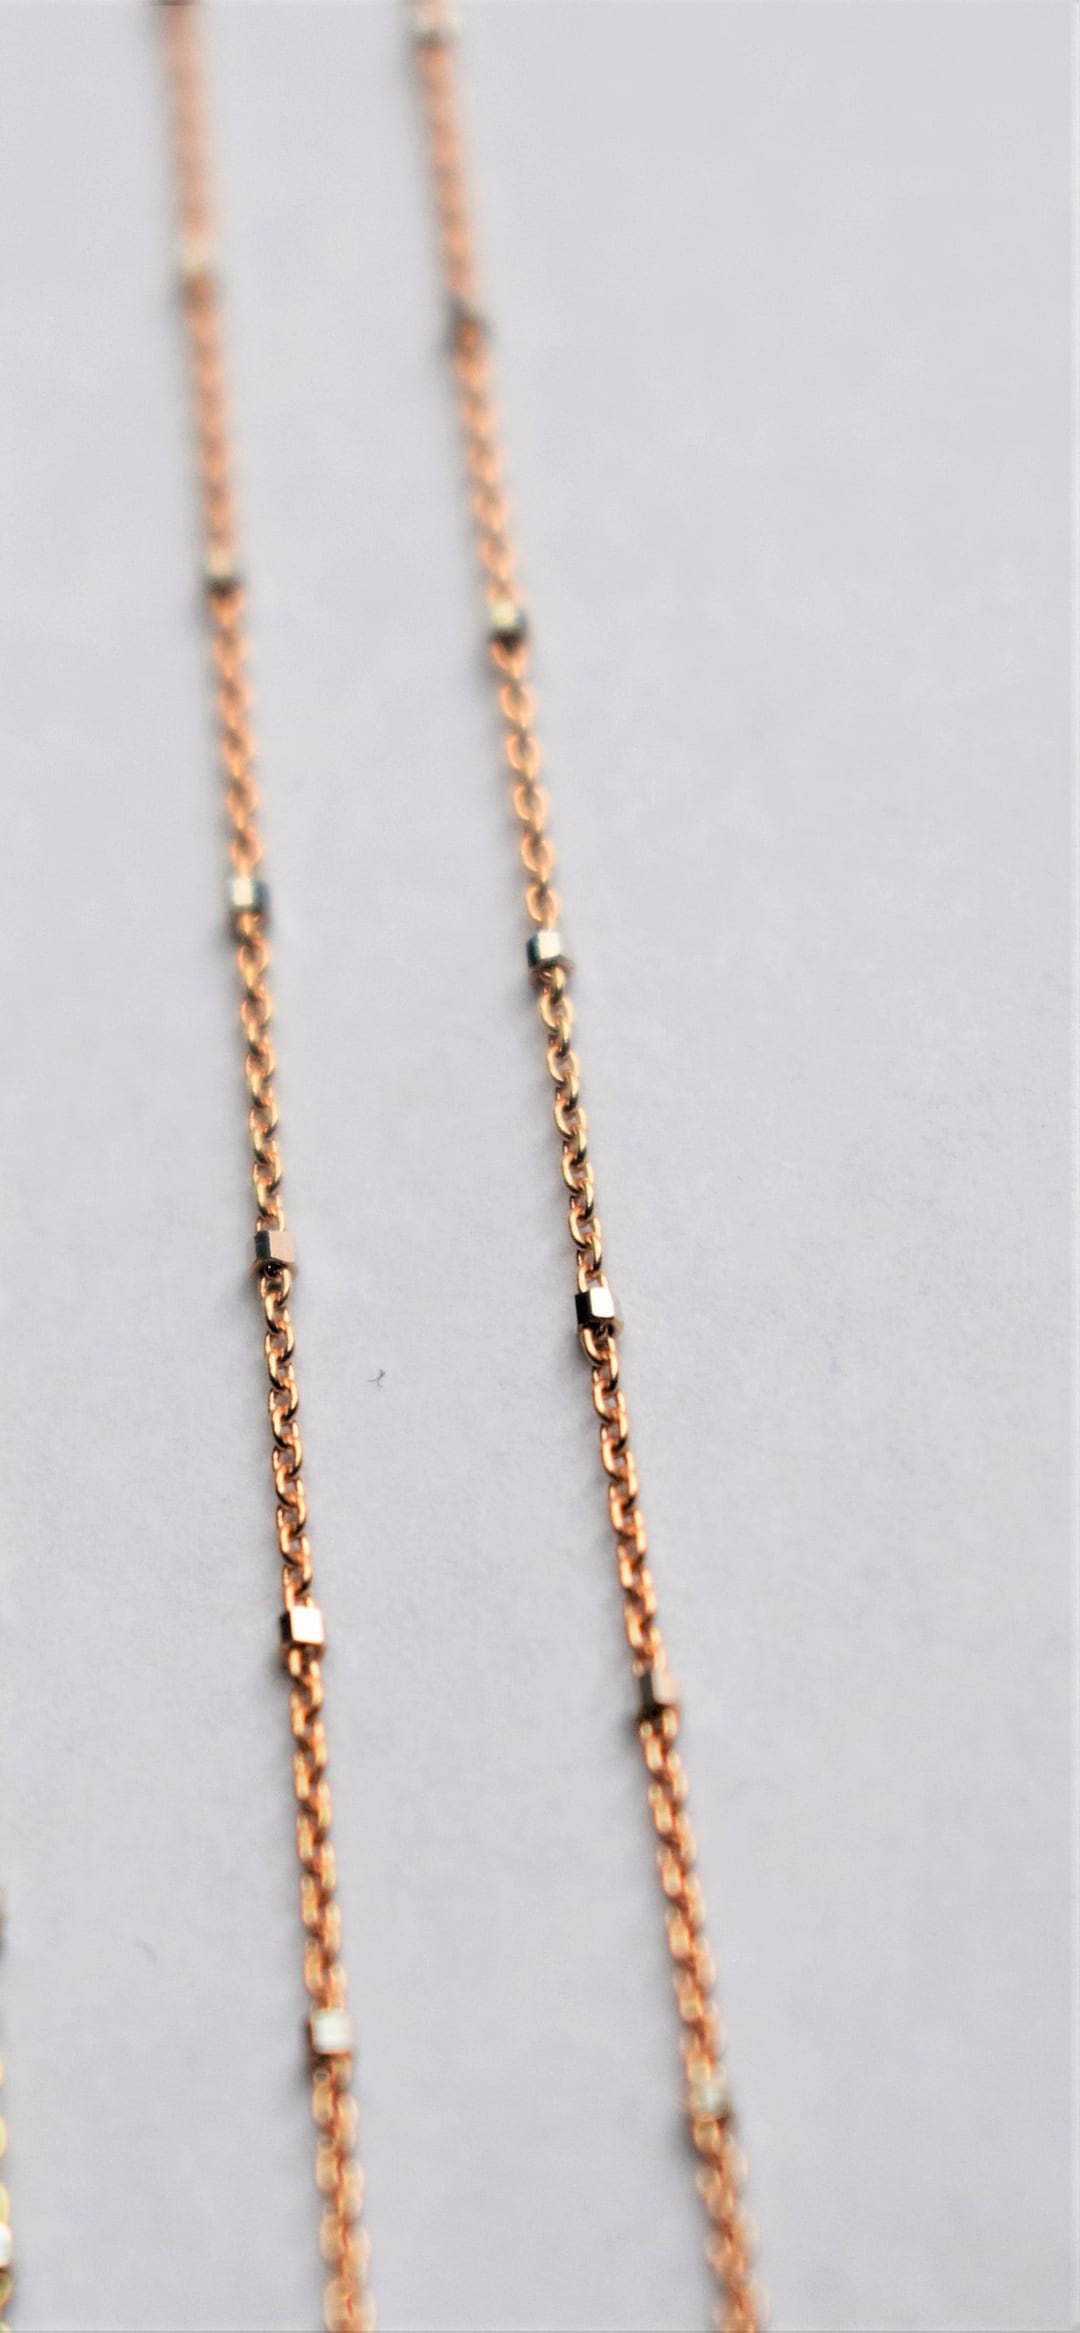 Silver & Rose Gold Plated 18 Inch Heavy Pear-Shaped Link Chain